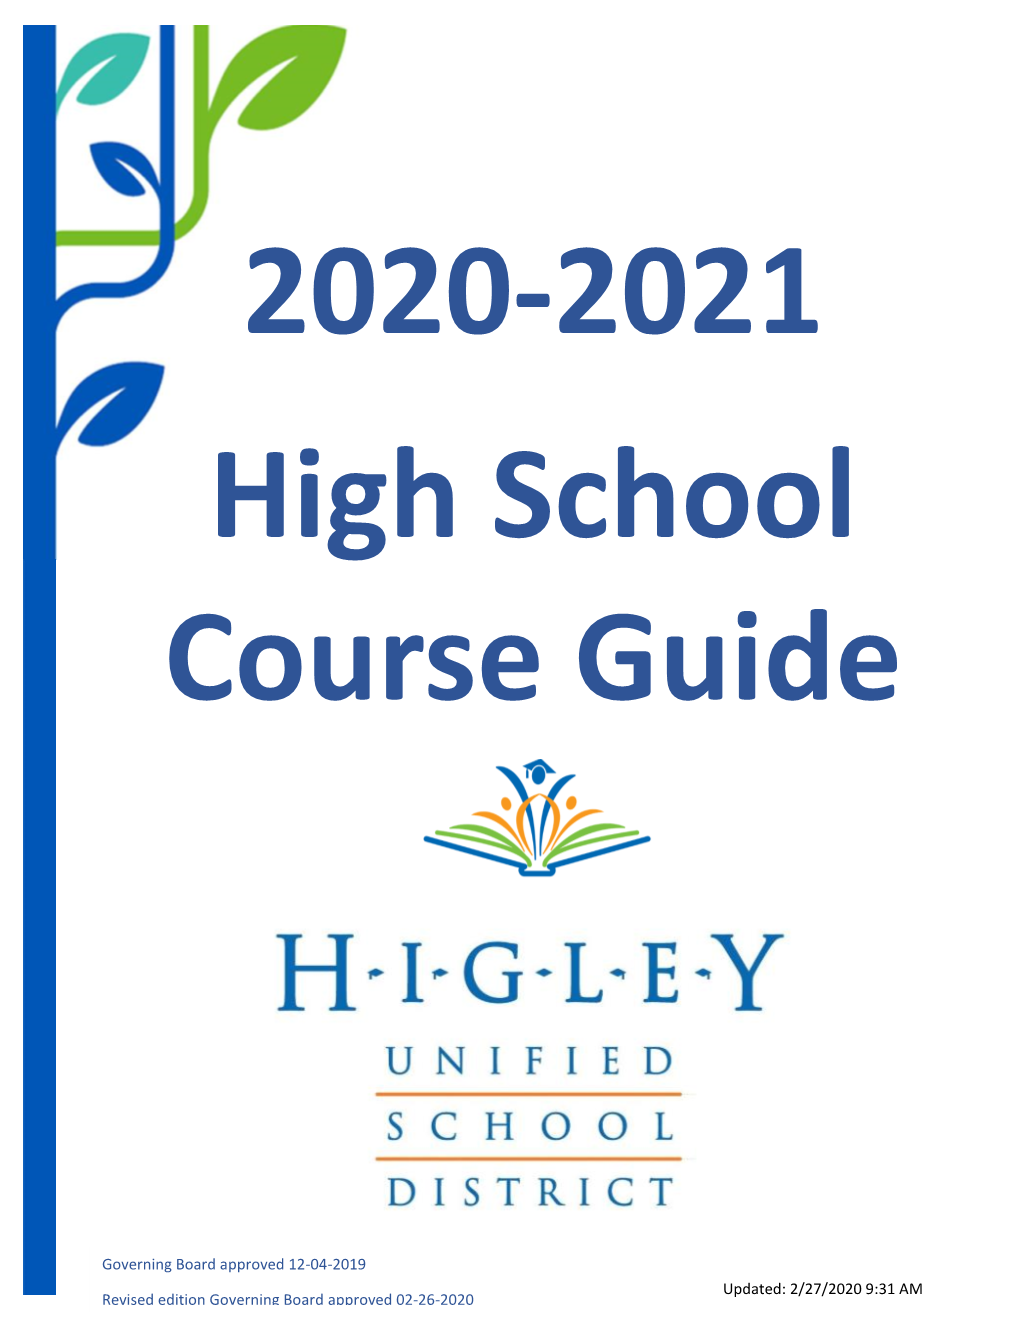 2020-2021 High School Course Guide